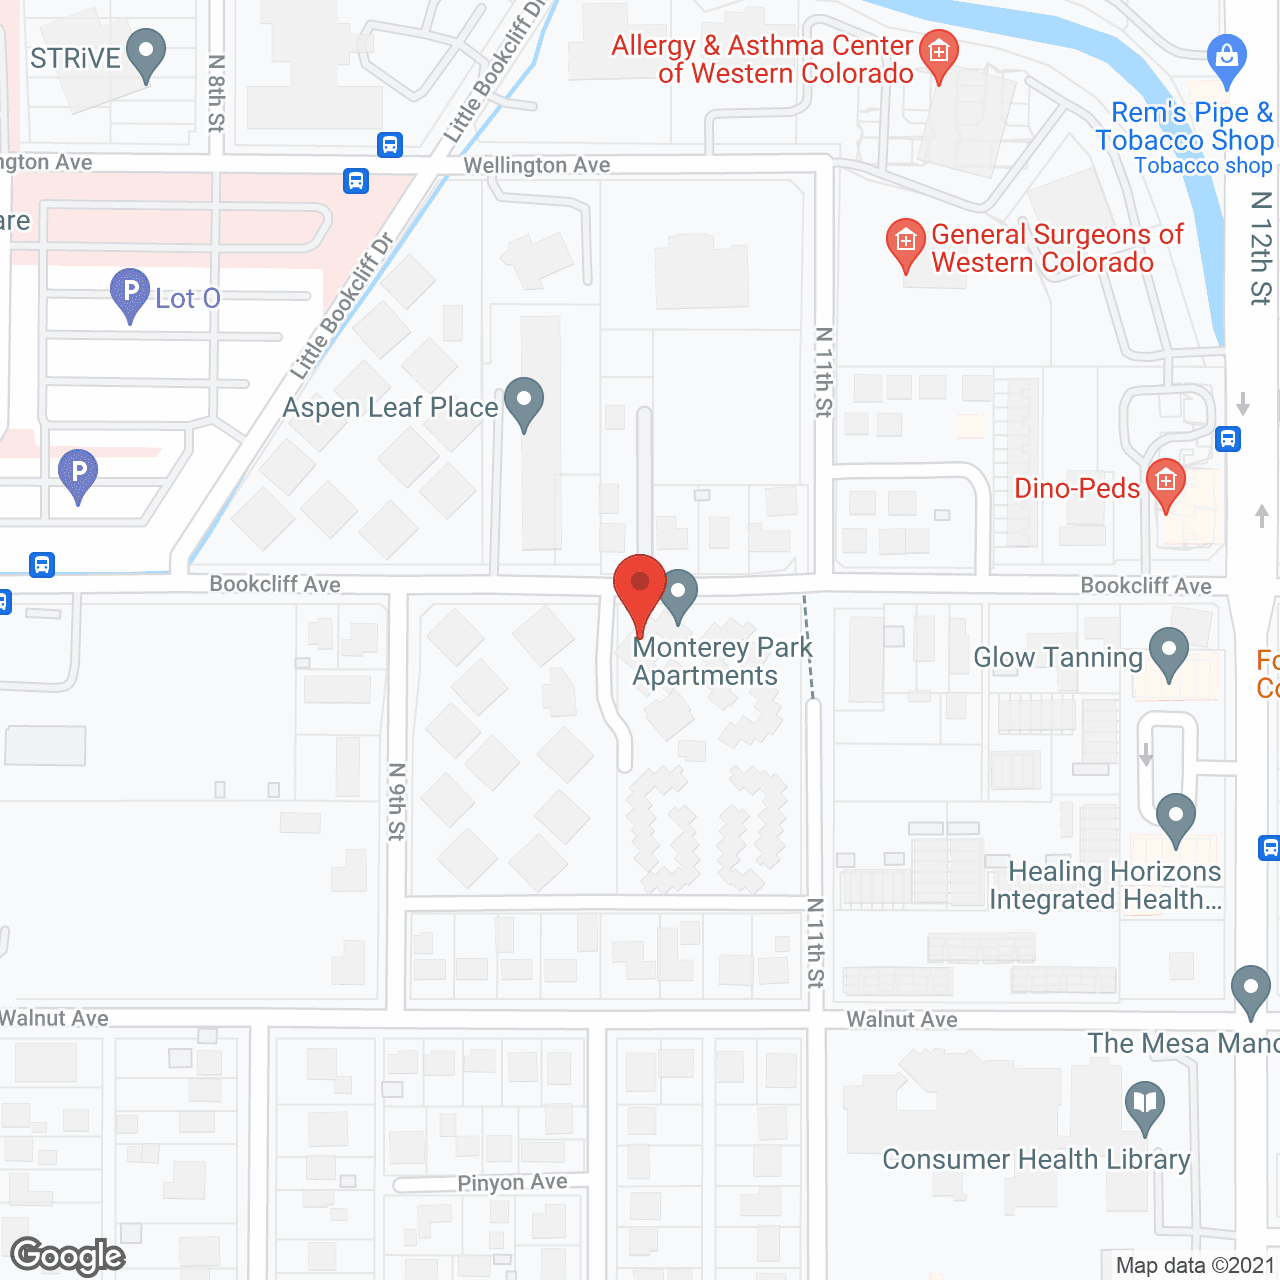 Monterey Park Apartments in google map